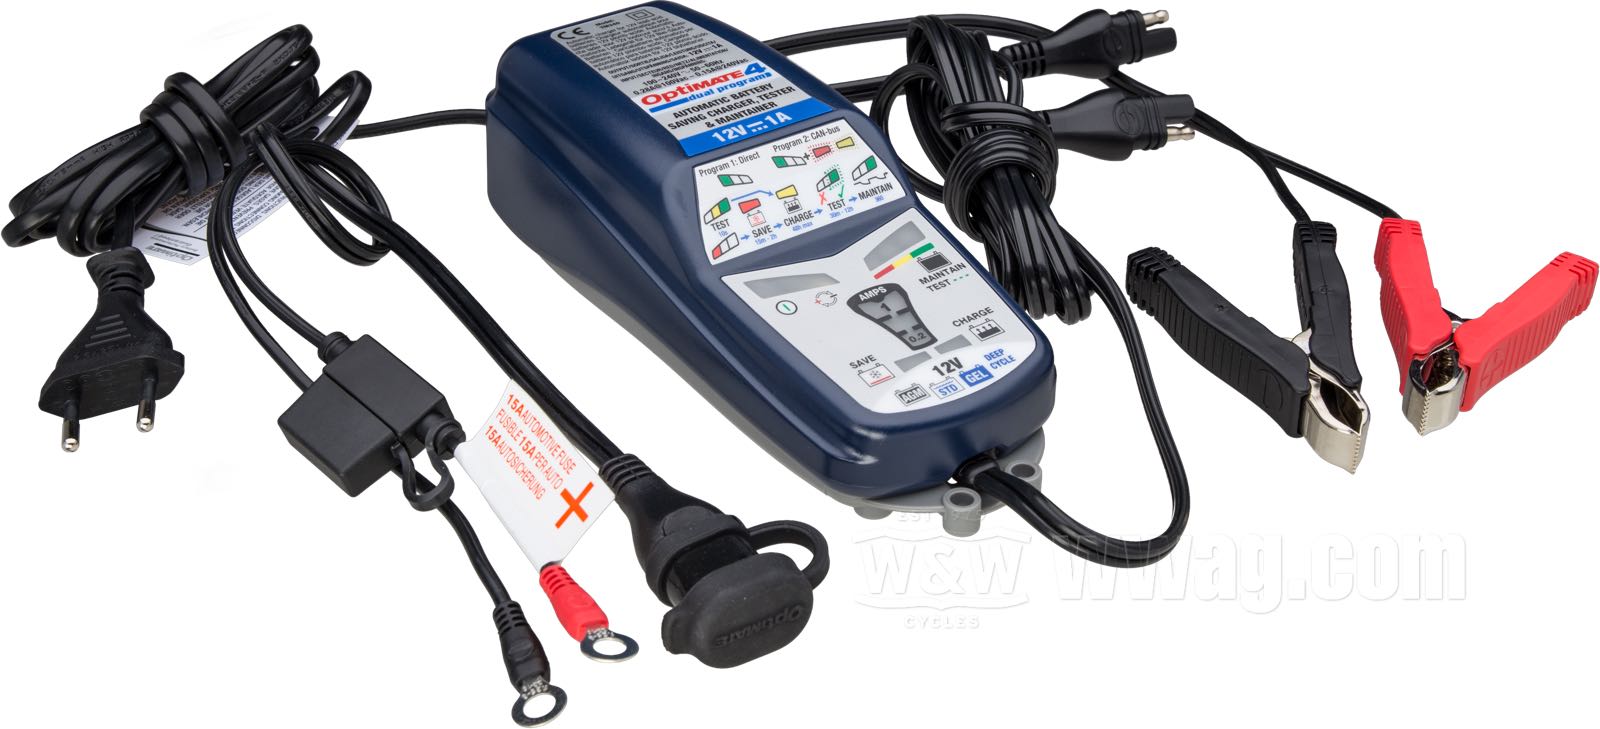 OPTIMATE 4 DUAL PROGRAM MOTORCYCLE BATTERY CHARGER NEW CHARGER MAINTAINER